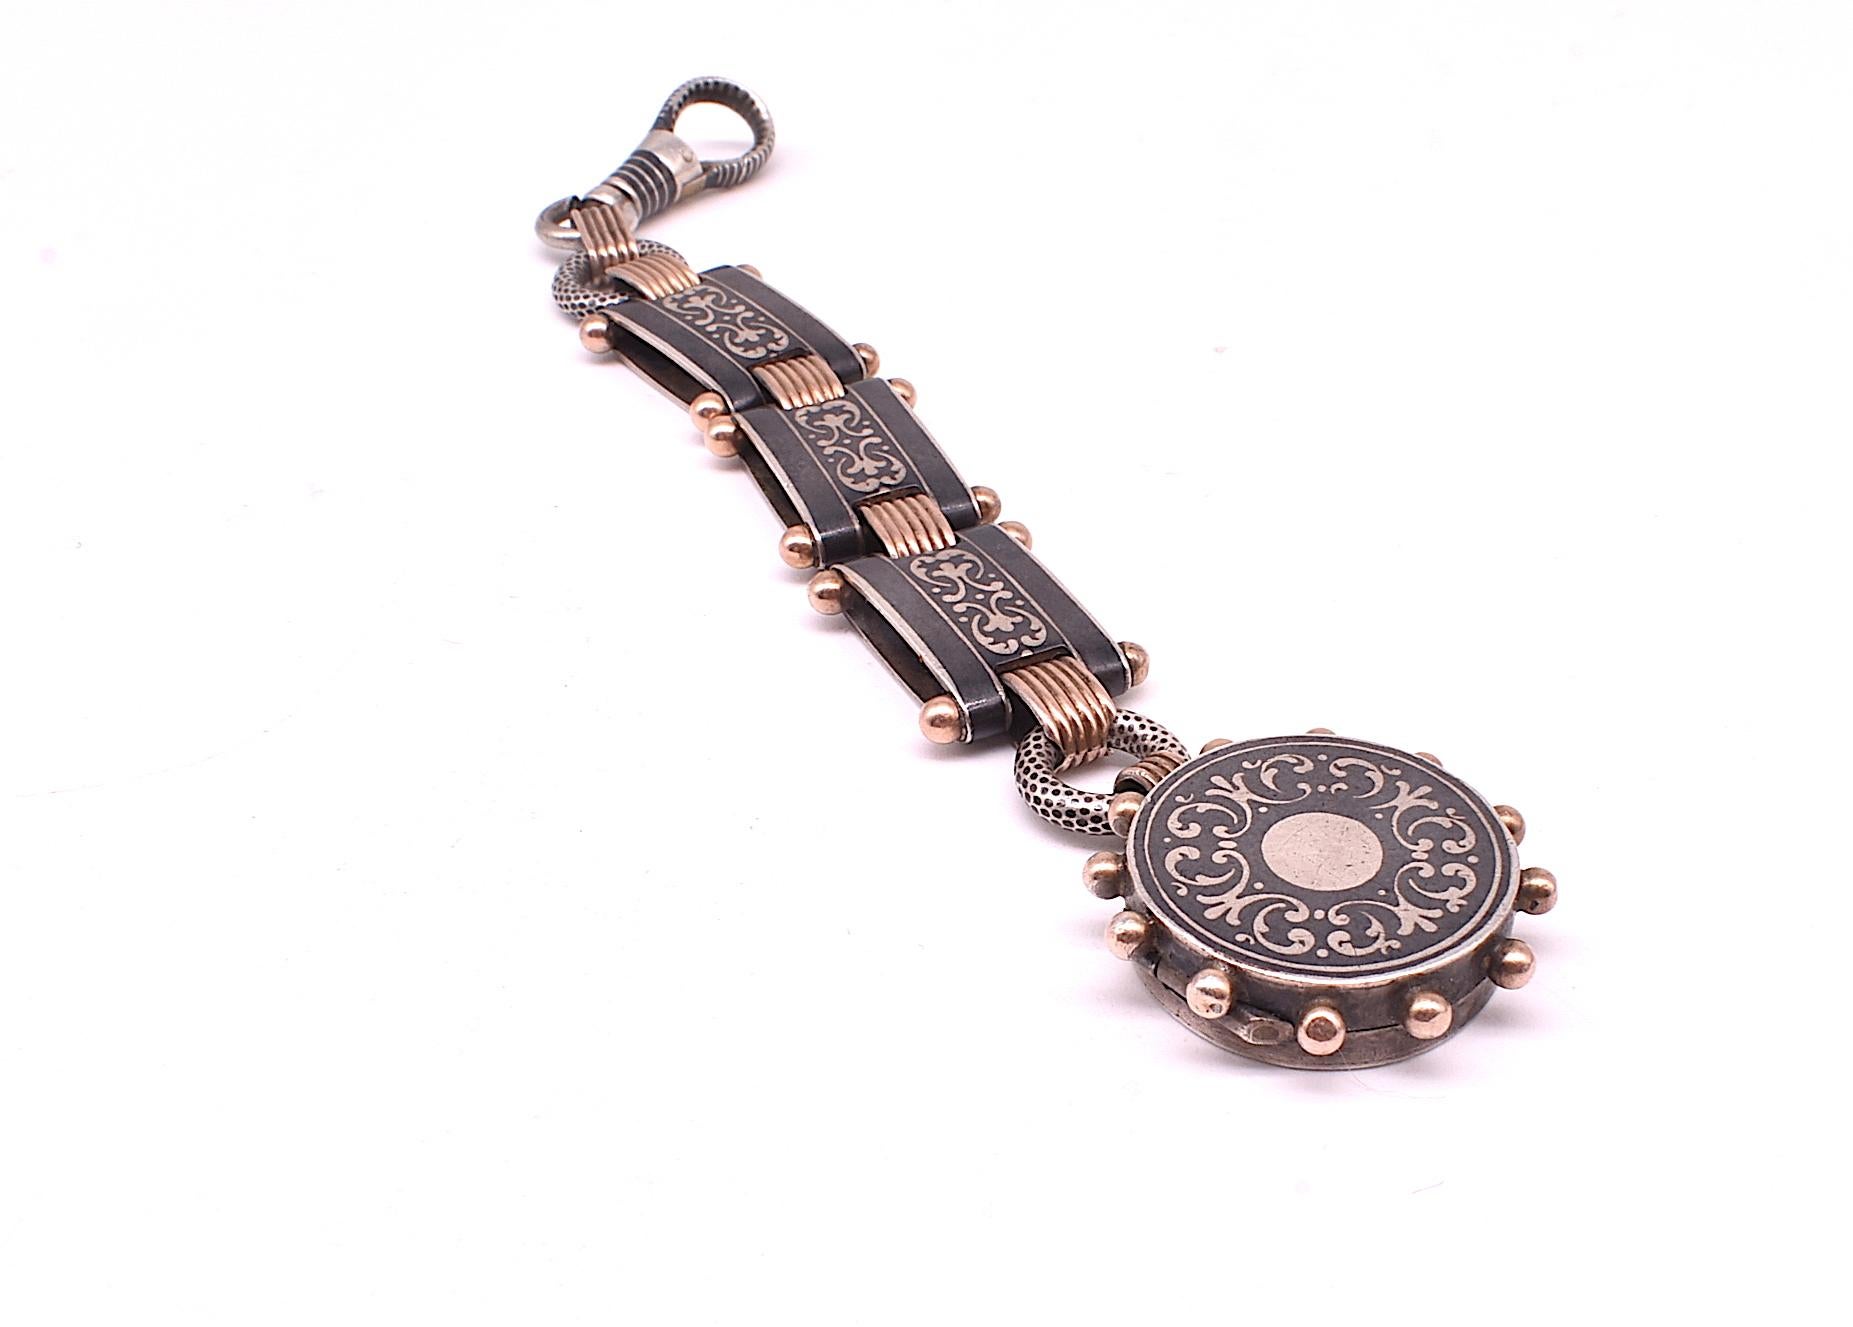 The rare fob pendant that is 3 pieces in 1; it includes a beautiful large niello dog clip which attaches to 3 niello links which further attaches to a 2 compartment round locket, .75 inches in diameter..  Long and elegant, the dog clip allows you to